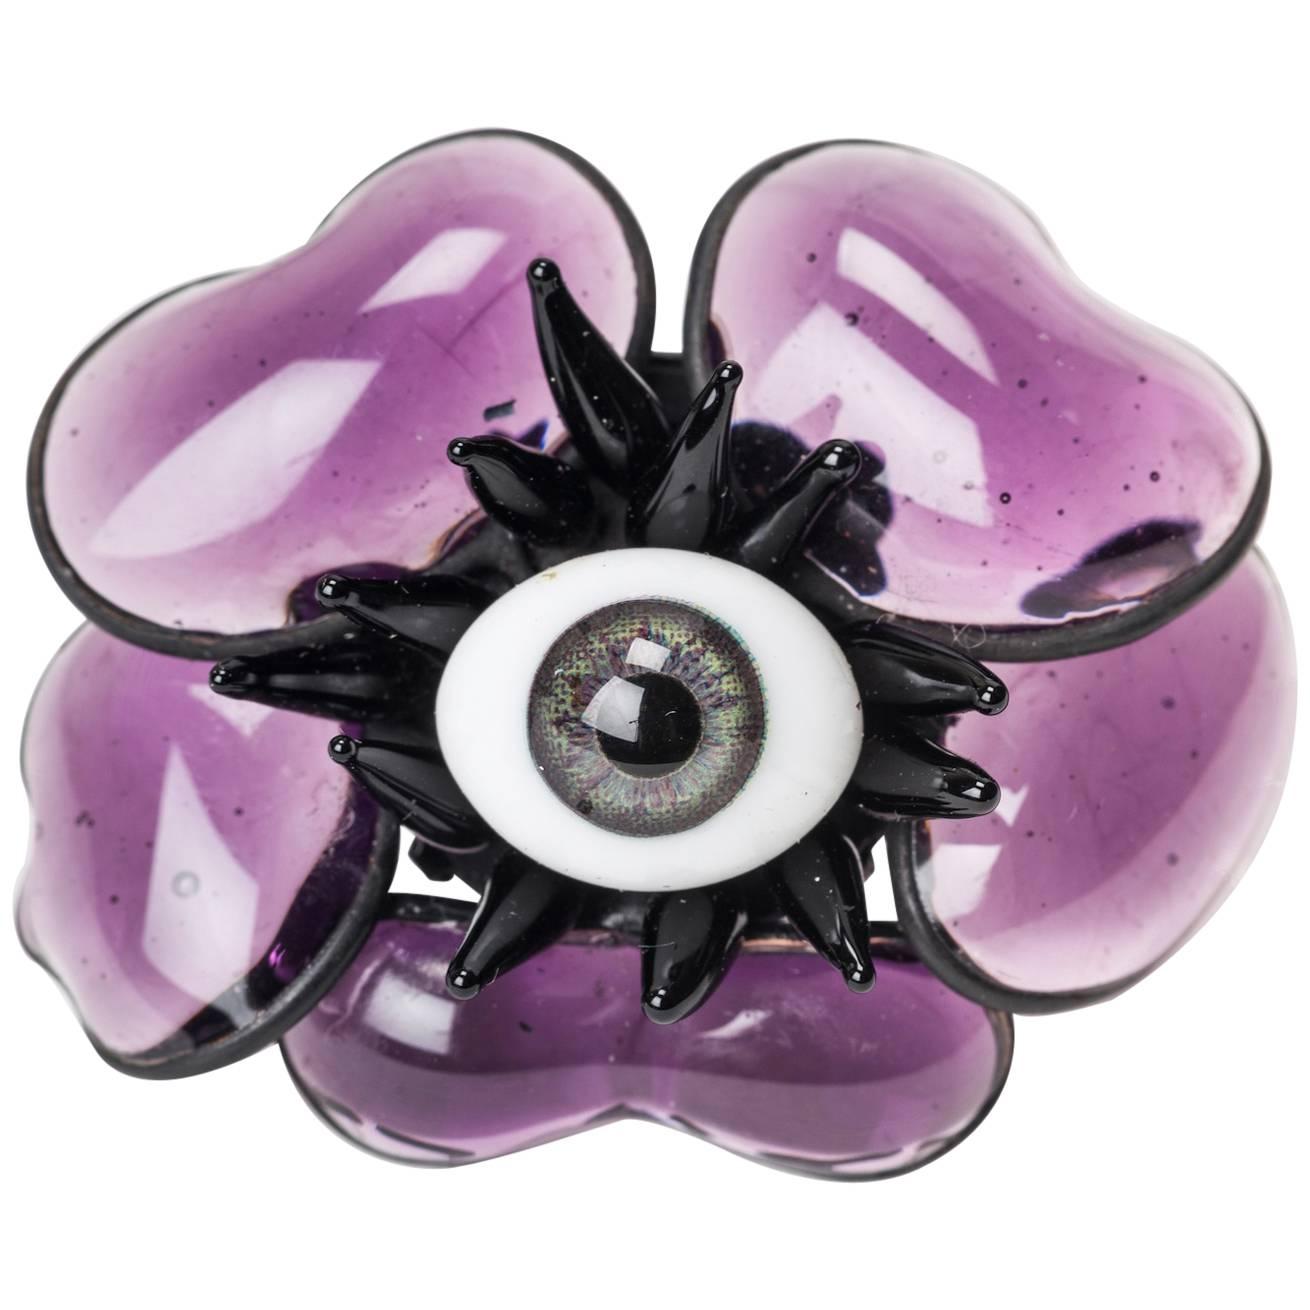 MWLC Surrealist Amythest Poppy Ring For Sale